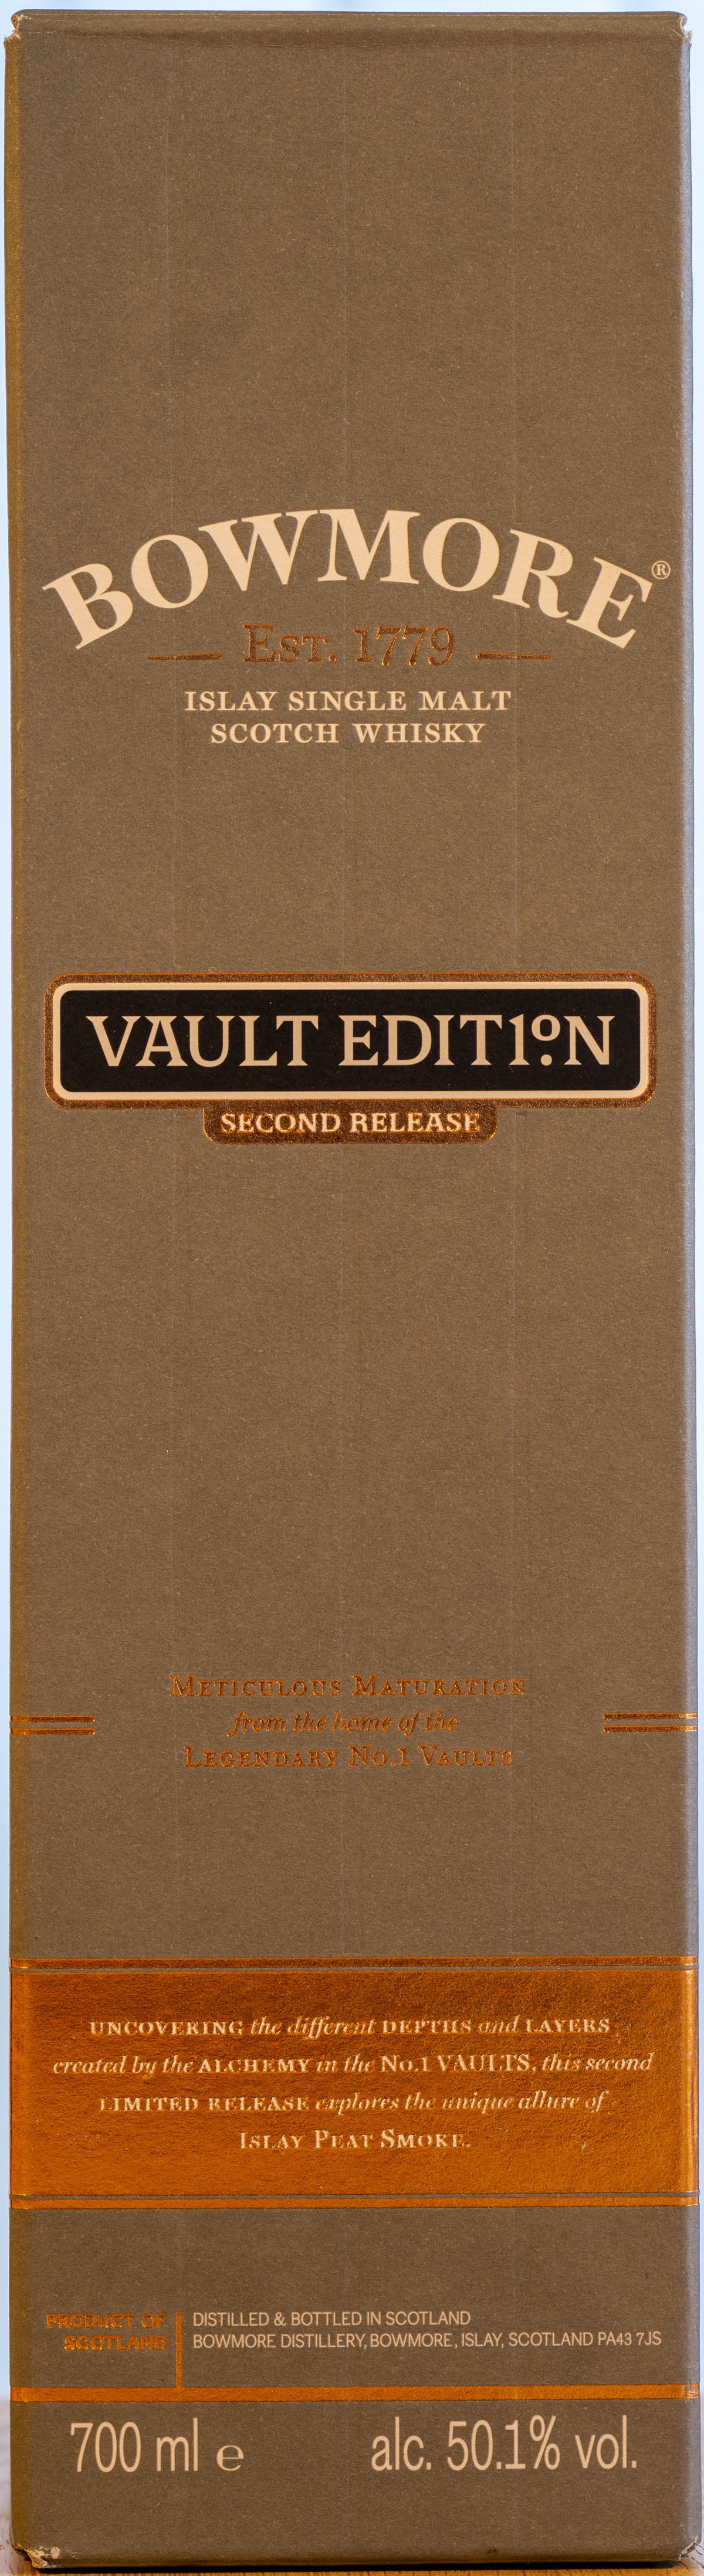 Billede: PHC_3925 - Bowmore Vault Edit1on Peat Smoke (second release) - box front.jpg